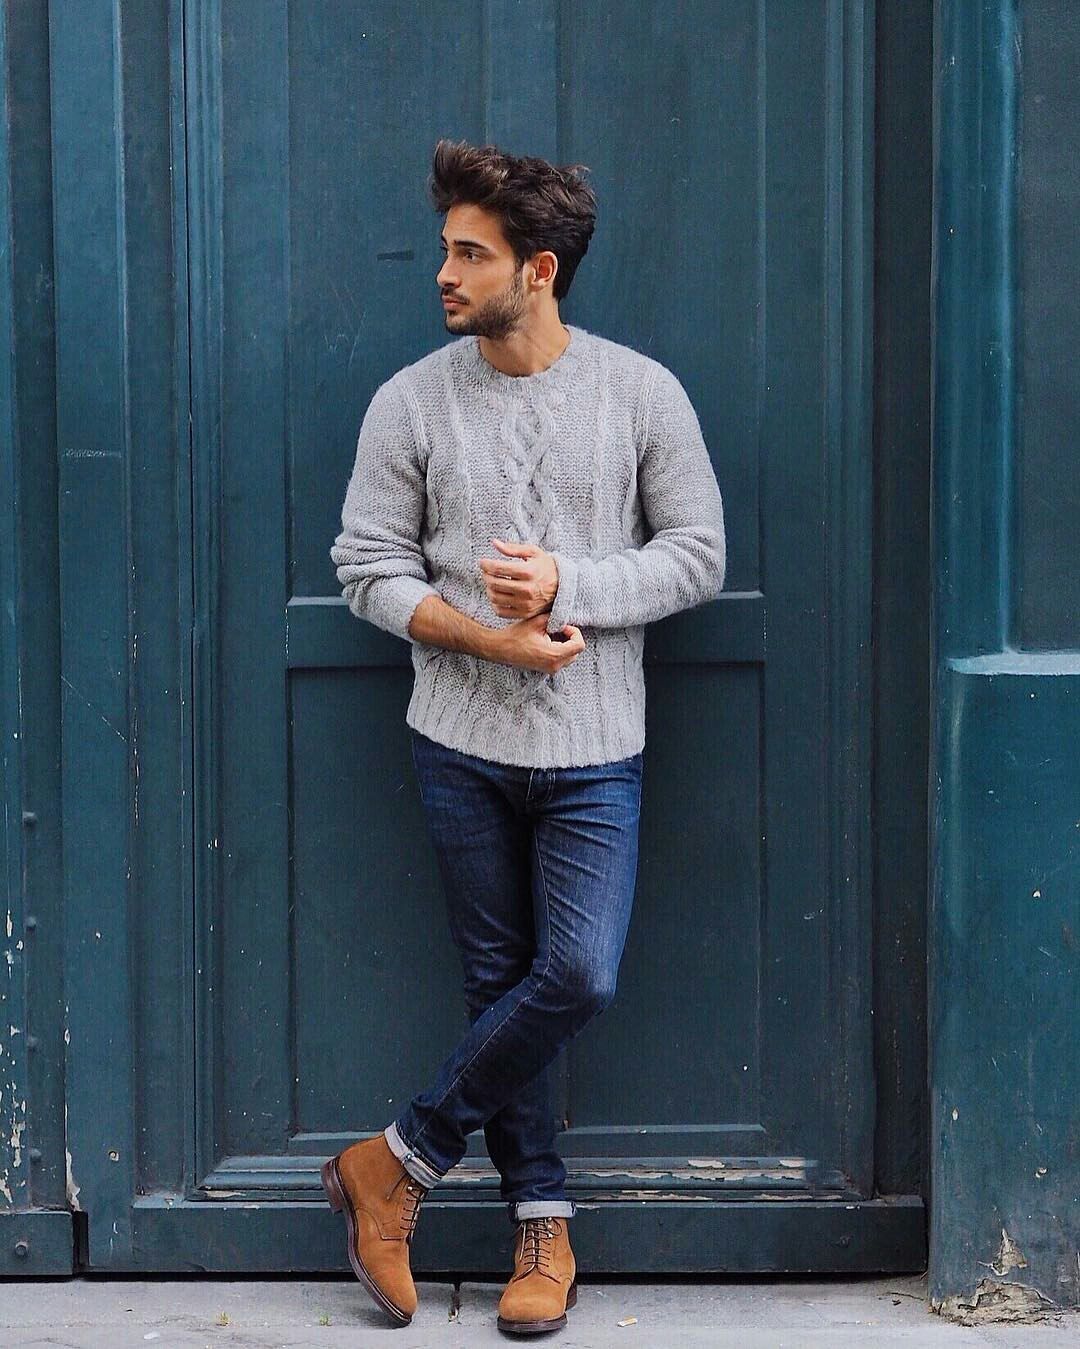 Winter Outfits for Men - Layering is KING. - The Indian Gent - Winter Outfits for Men - Layering is KING. - The Indian Gent -   17 style Fashion homme ideas